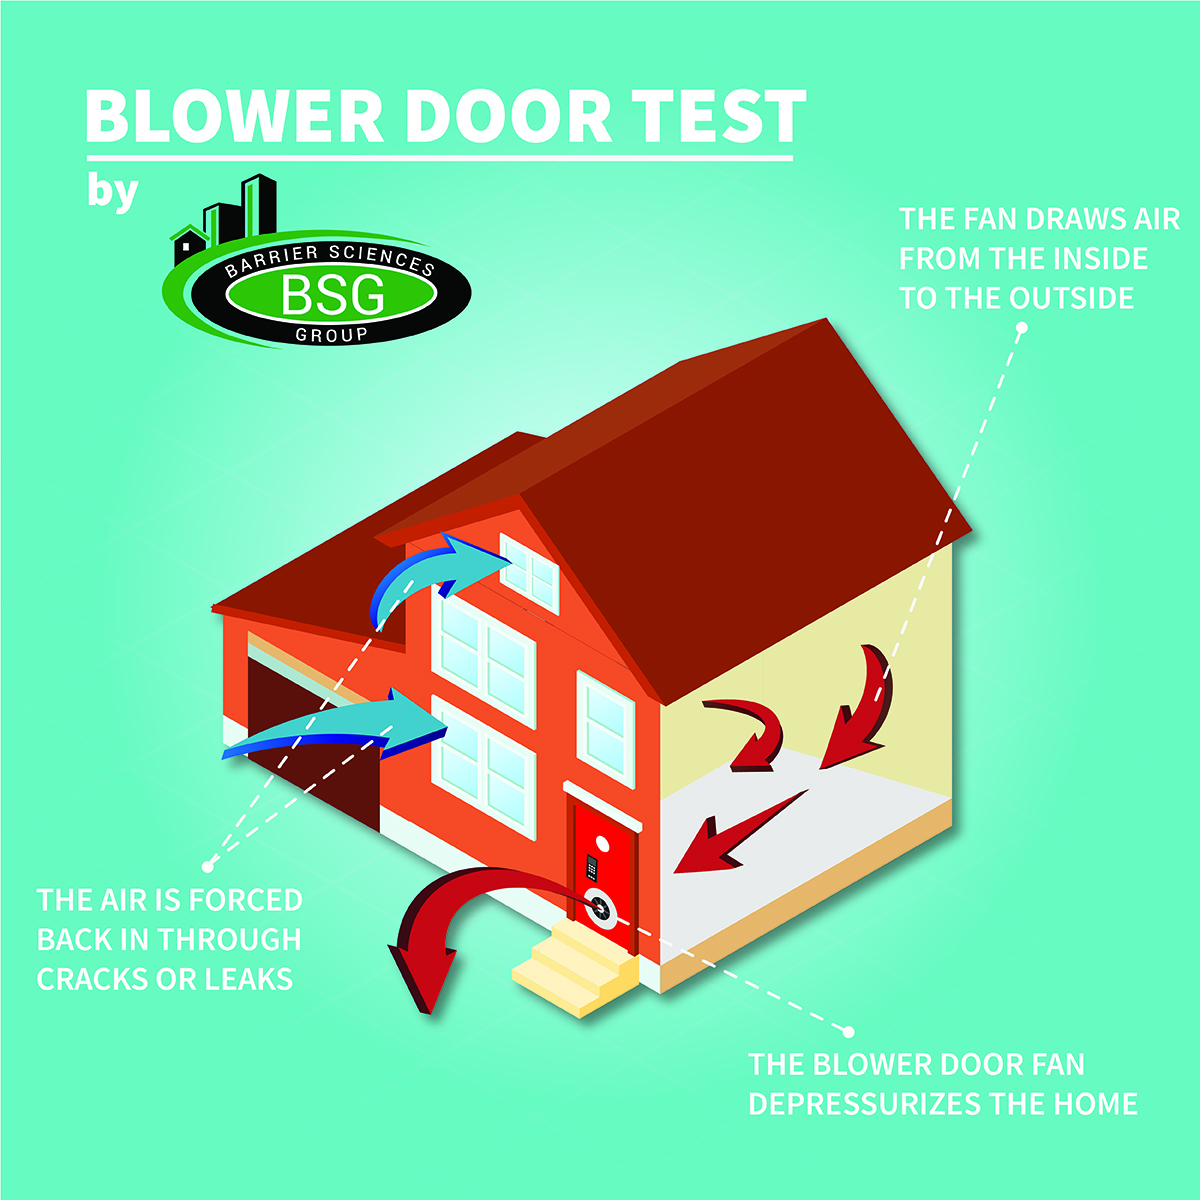 Blower door test frequently asked questions